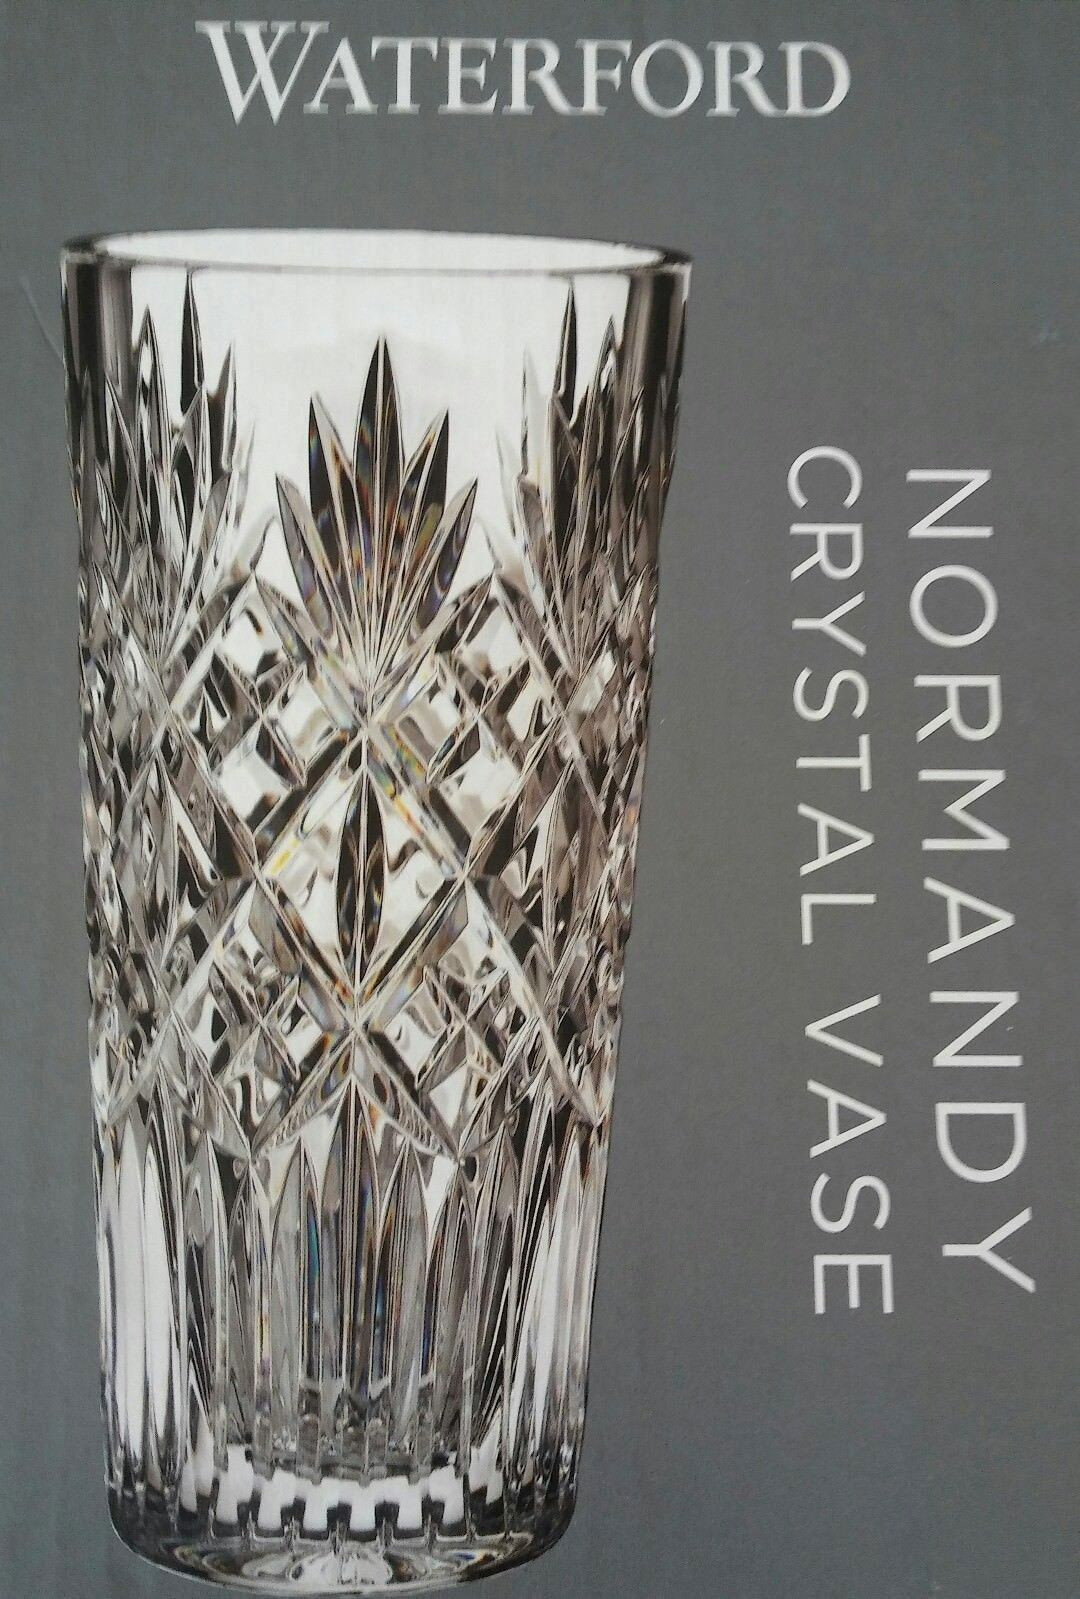 11 Lovable Marquis by Waterford Sheridan Flared 11 Crystal Vase 2024 free download marquis by waterford sheridan flared 11 crystal vase of waterford normandy vase 10 tall lead crystal 79 99 picclick in waterford normandy vase 10 tall lead crystal 1 of 5 see more